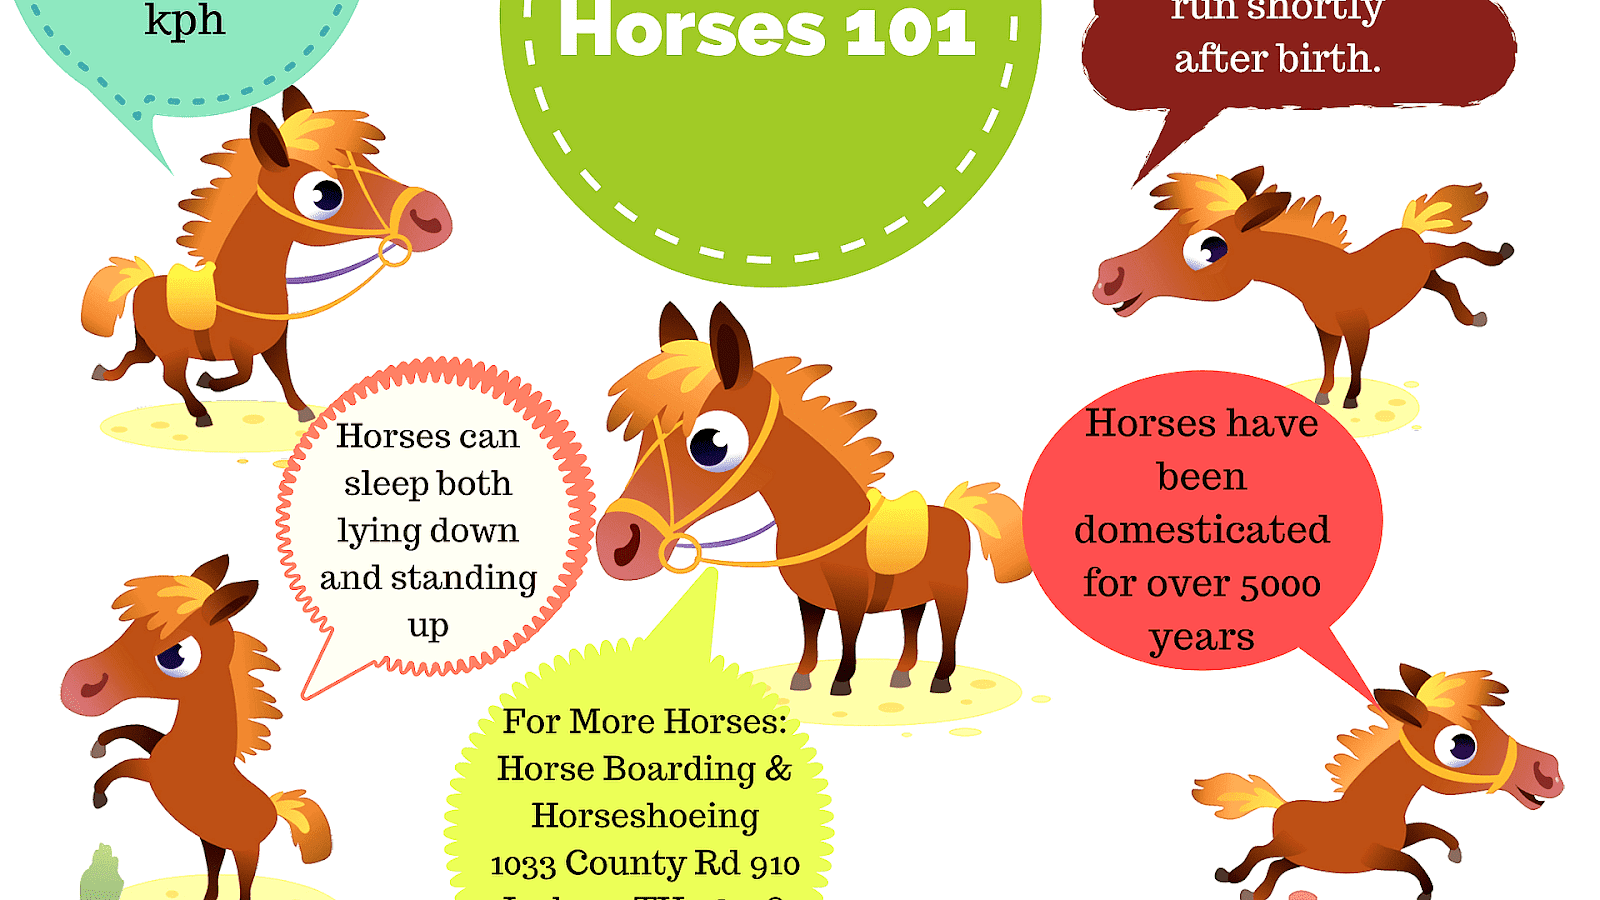 interesting-facts-about-thoroughbred-horses-horse-thoroughbred-breeds